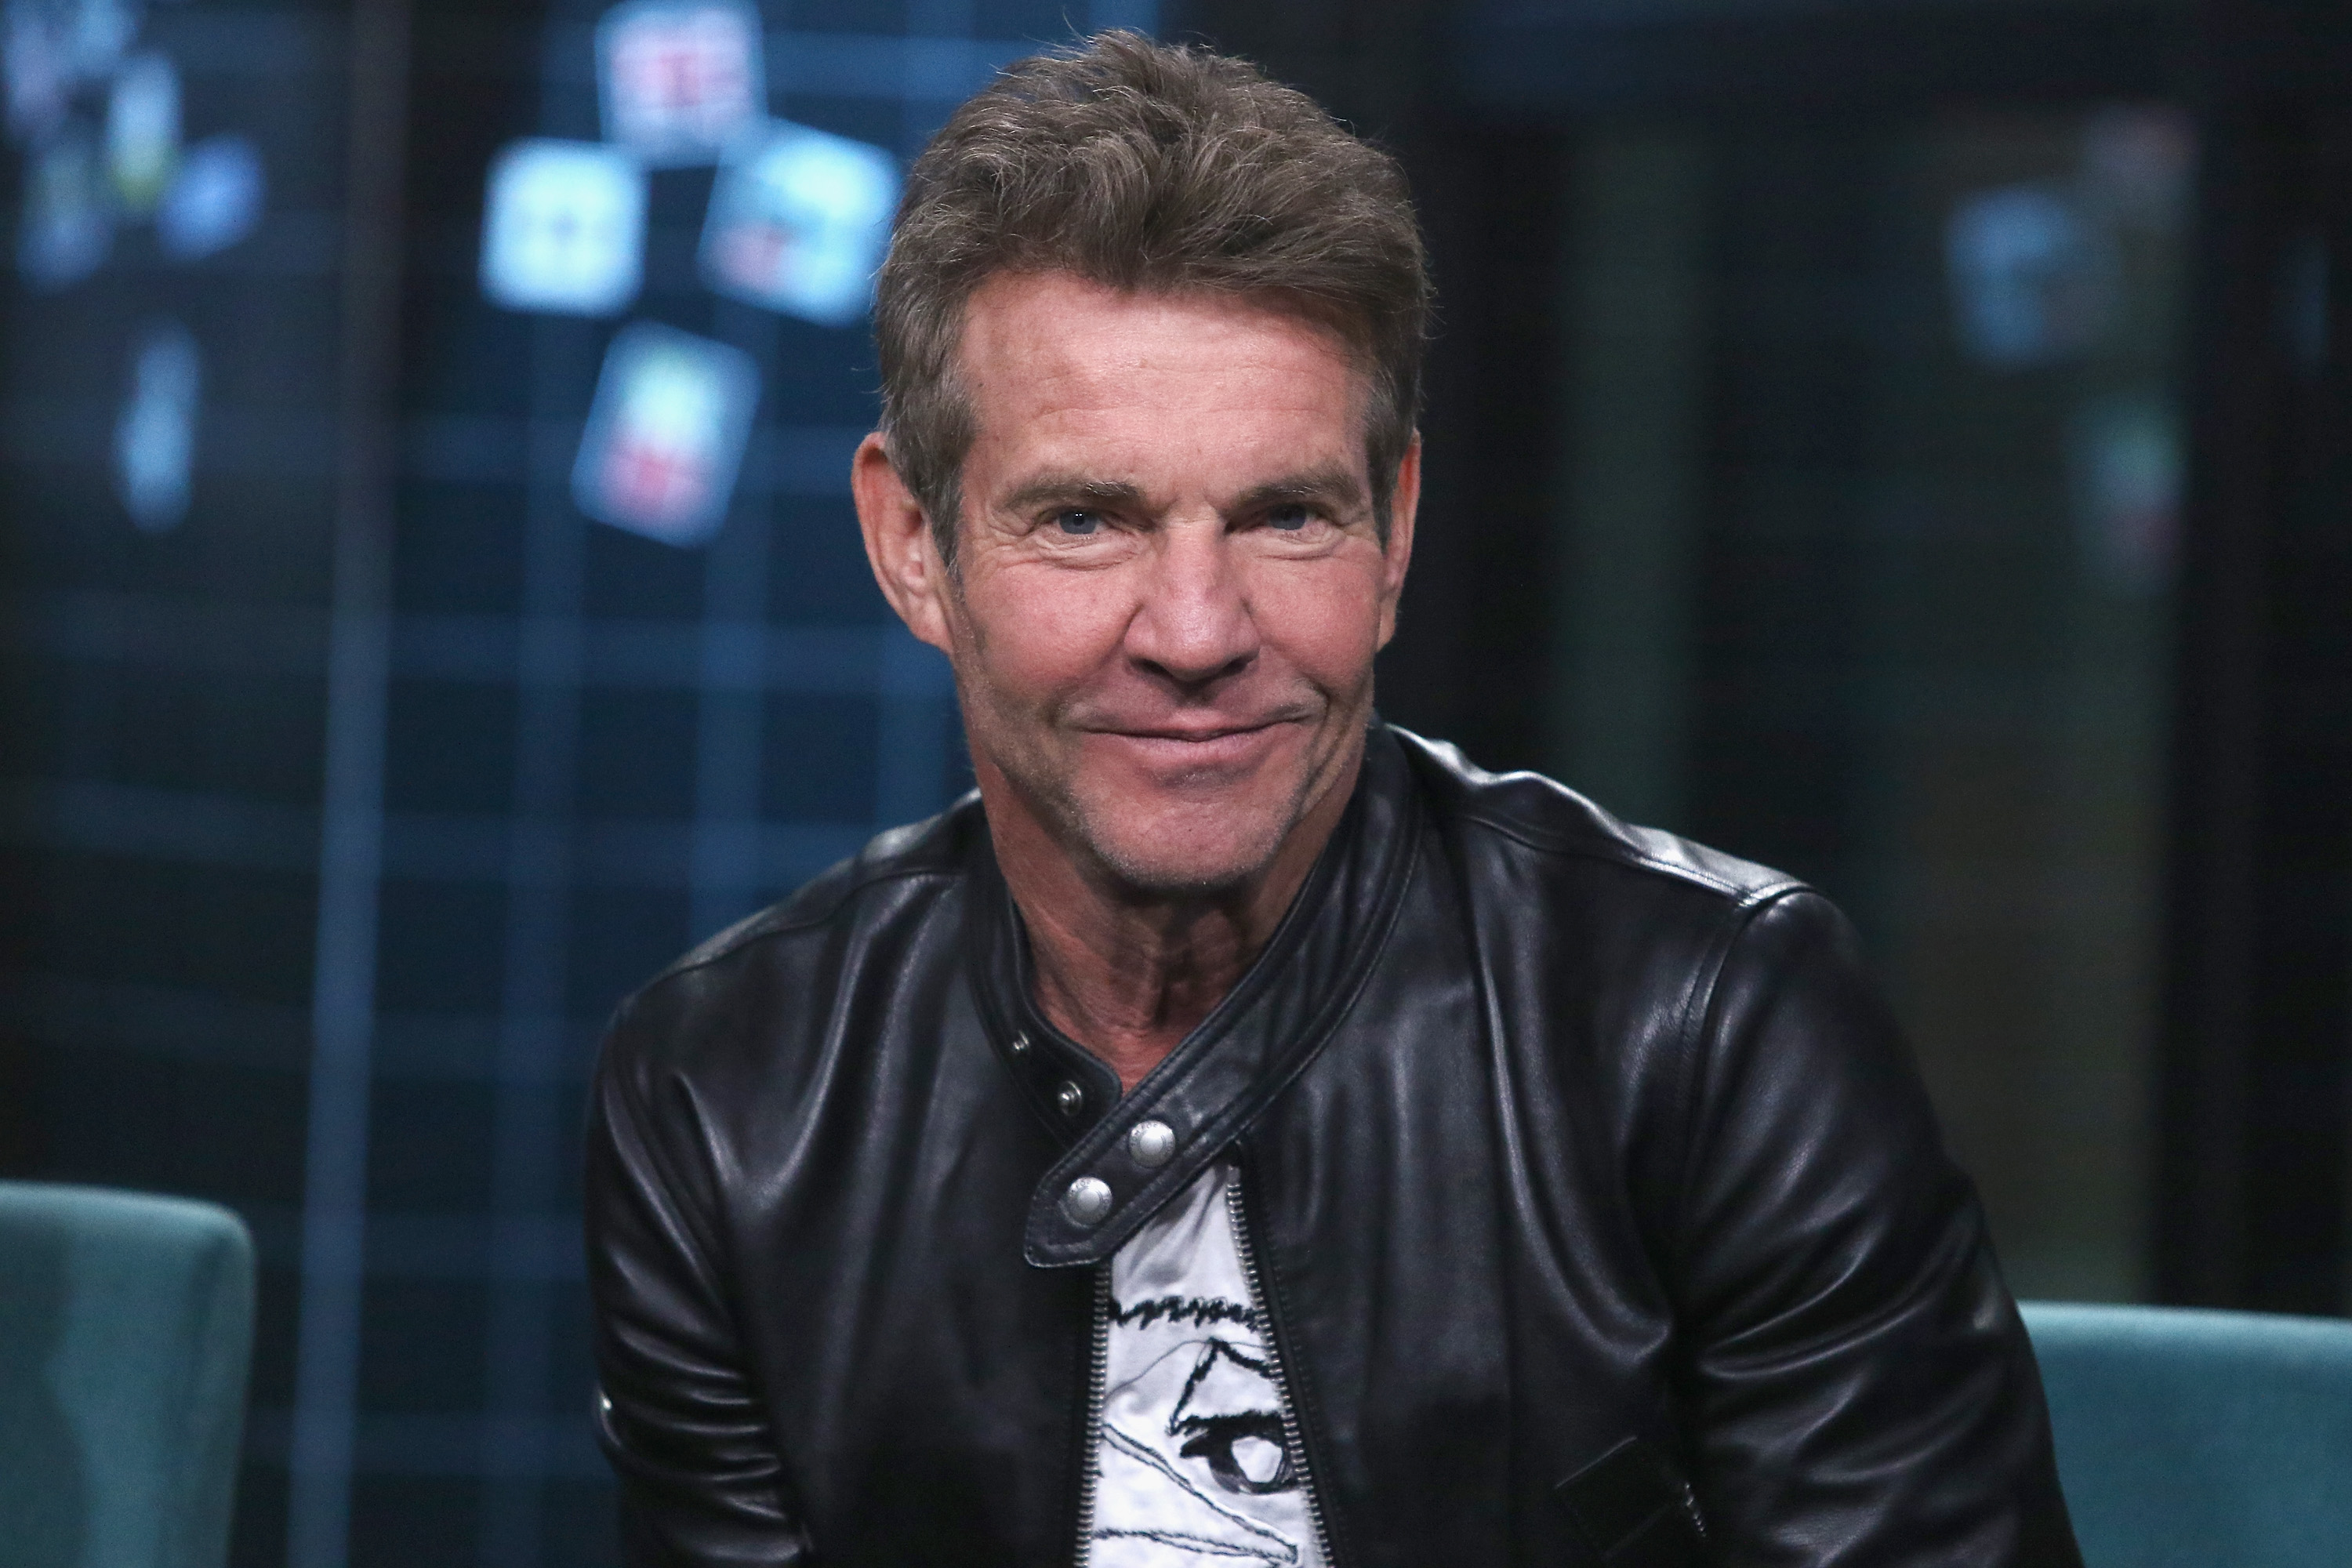 Dennis Quaid attends the Build Series to discuss "Out of the Box" on November 30, 2018 in New York City | Source: Getty Images